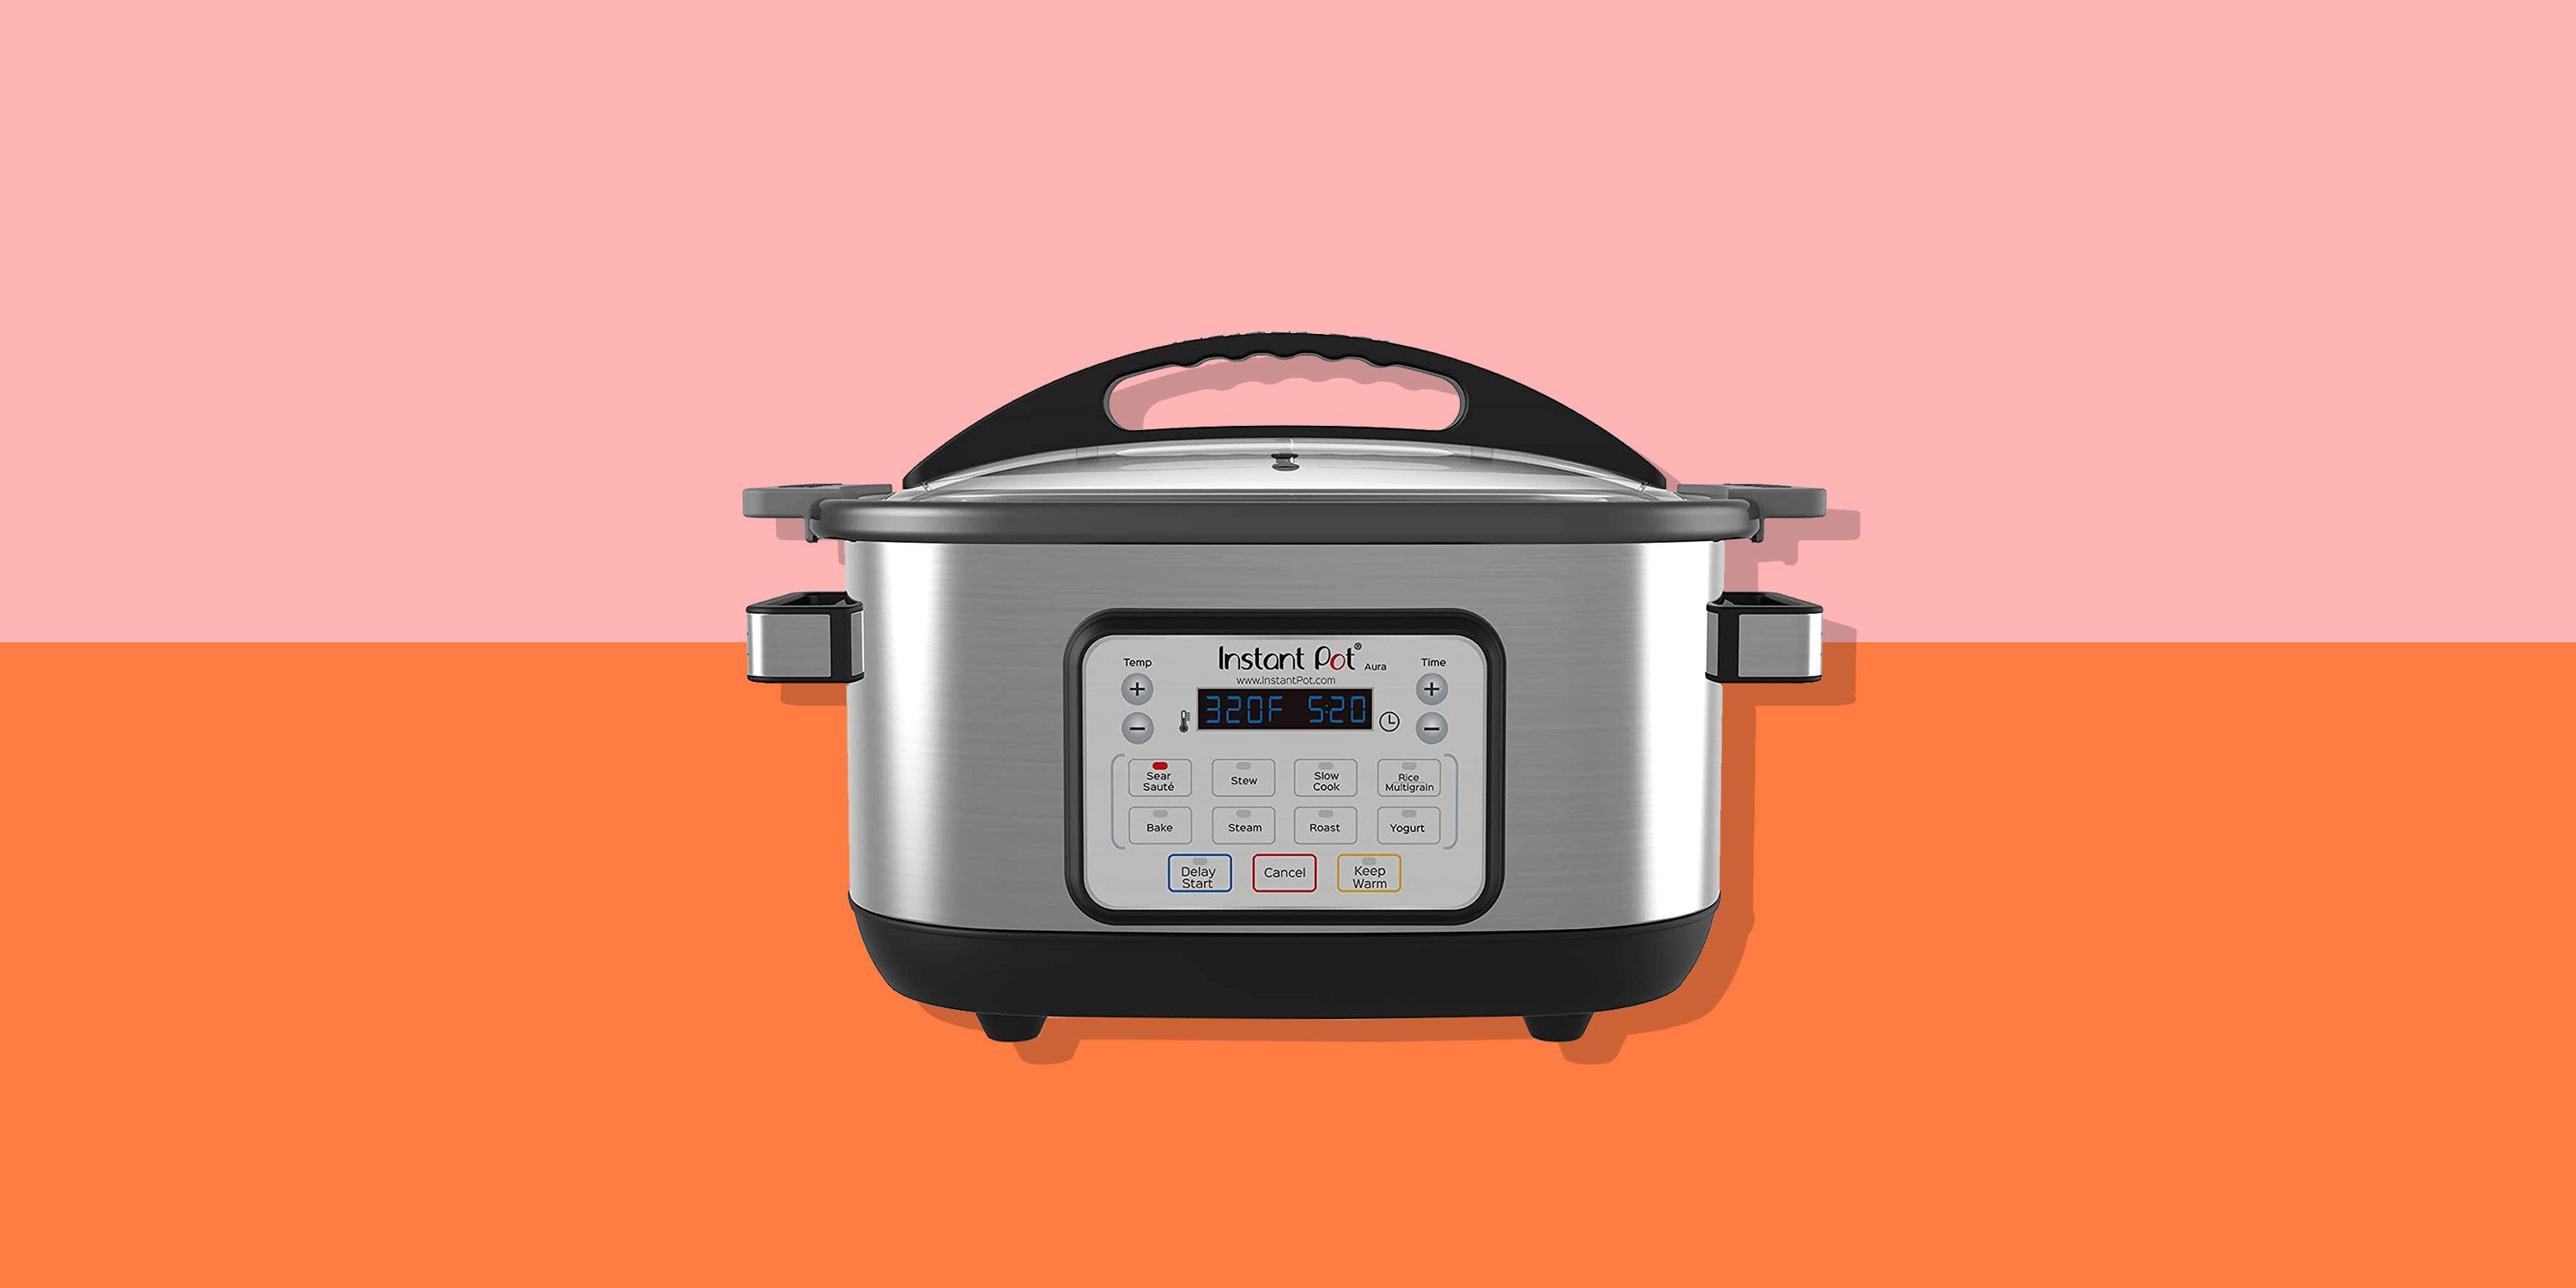 How to Travel on a Plane with an Instant Pot AND a Crock Pot